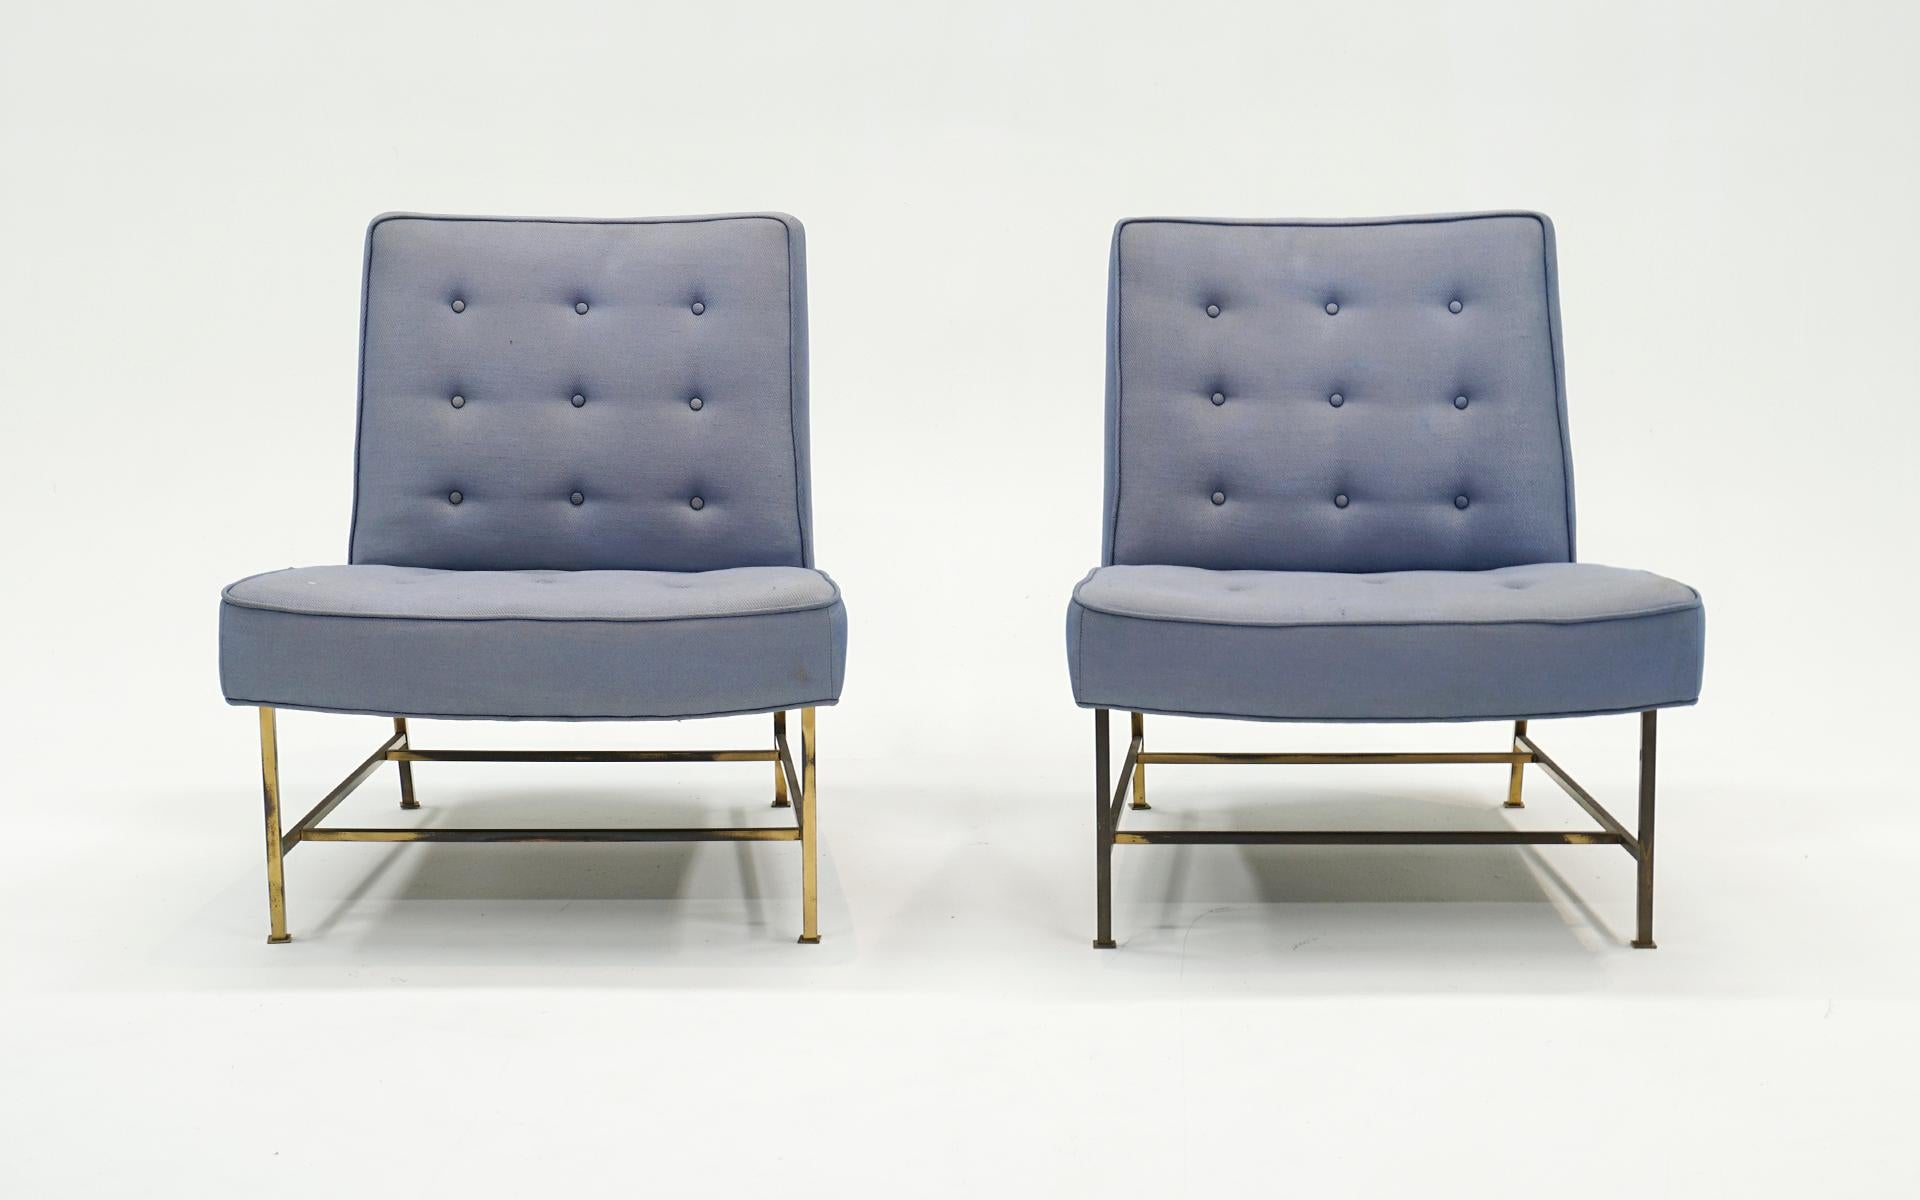 Rare pair of Harvey Probber lounge chairs with brass frames.  All original brass feet are intact.  The original blue upholstery shows wear, stains and imperfections and is priced accordingly for the new owner to upholster to their liking.  These are